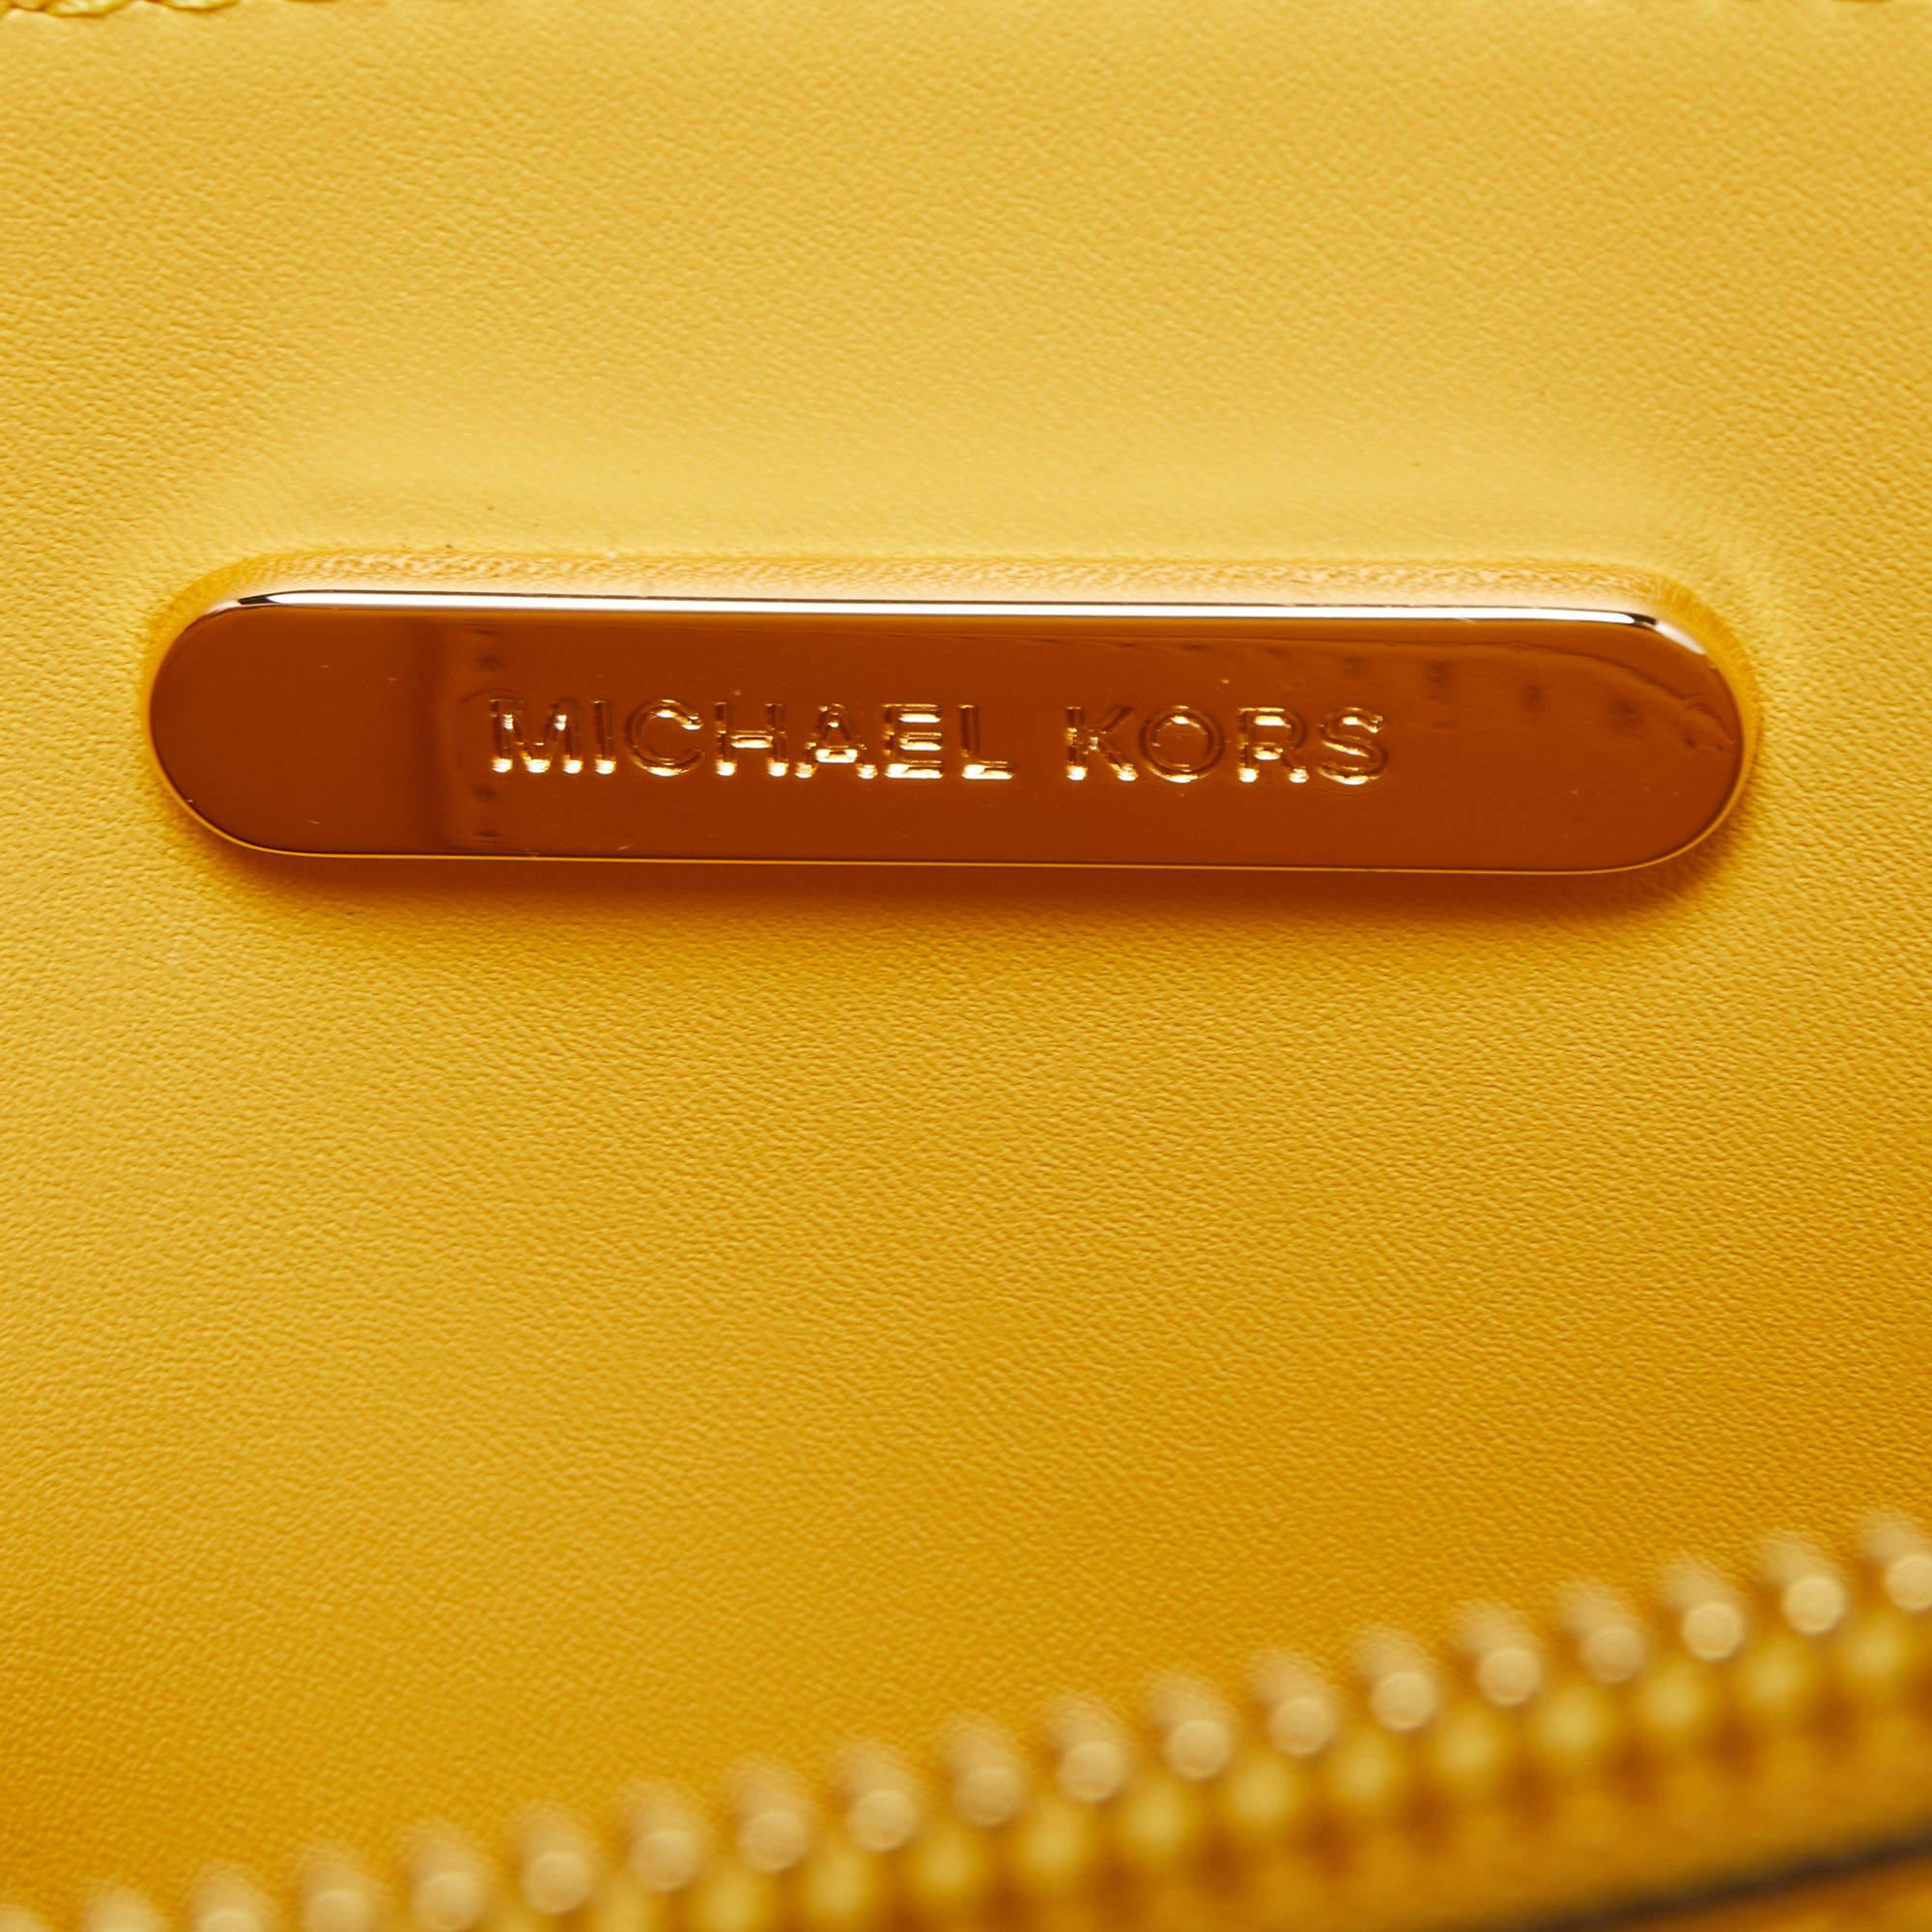 Michael Kors Yellow Leather Mercer Tote For Sale 6